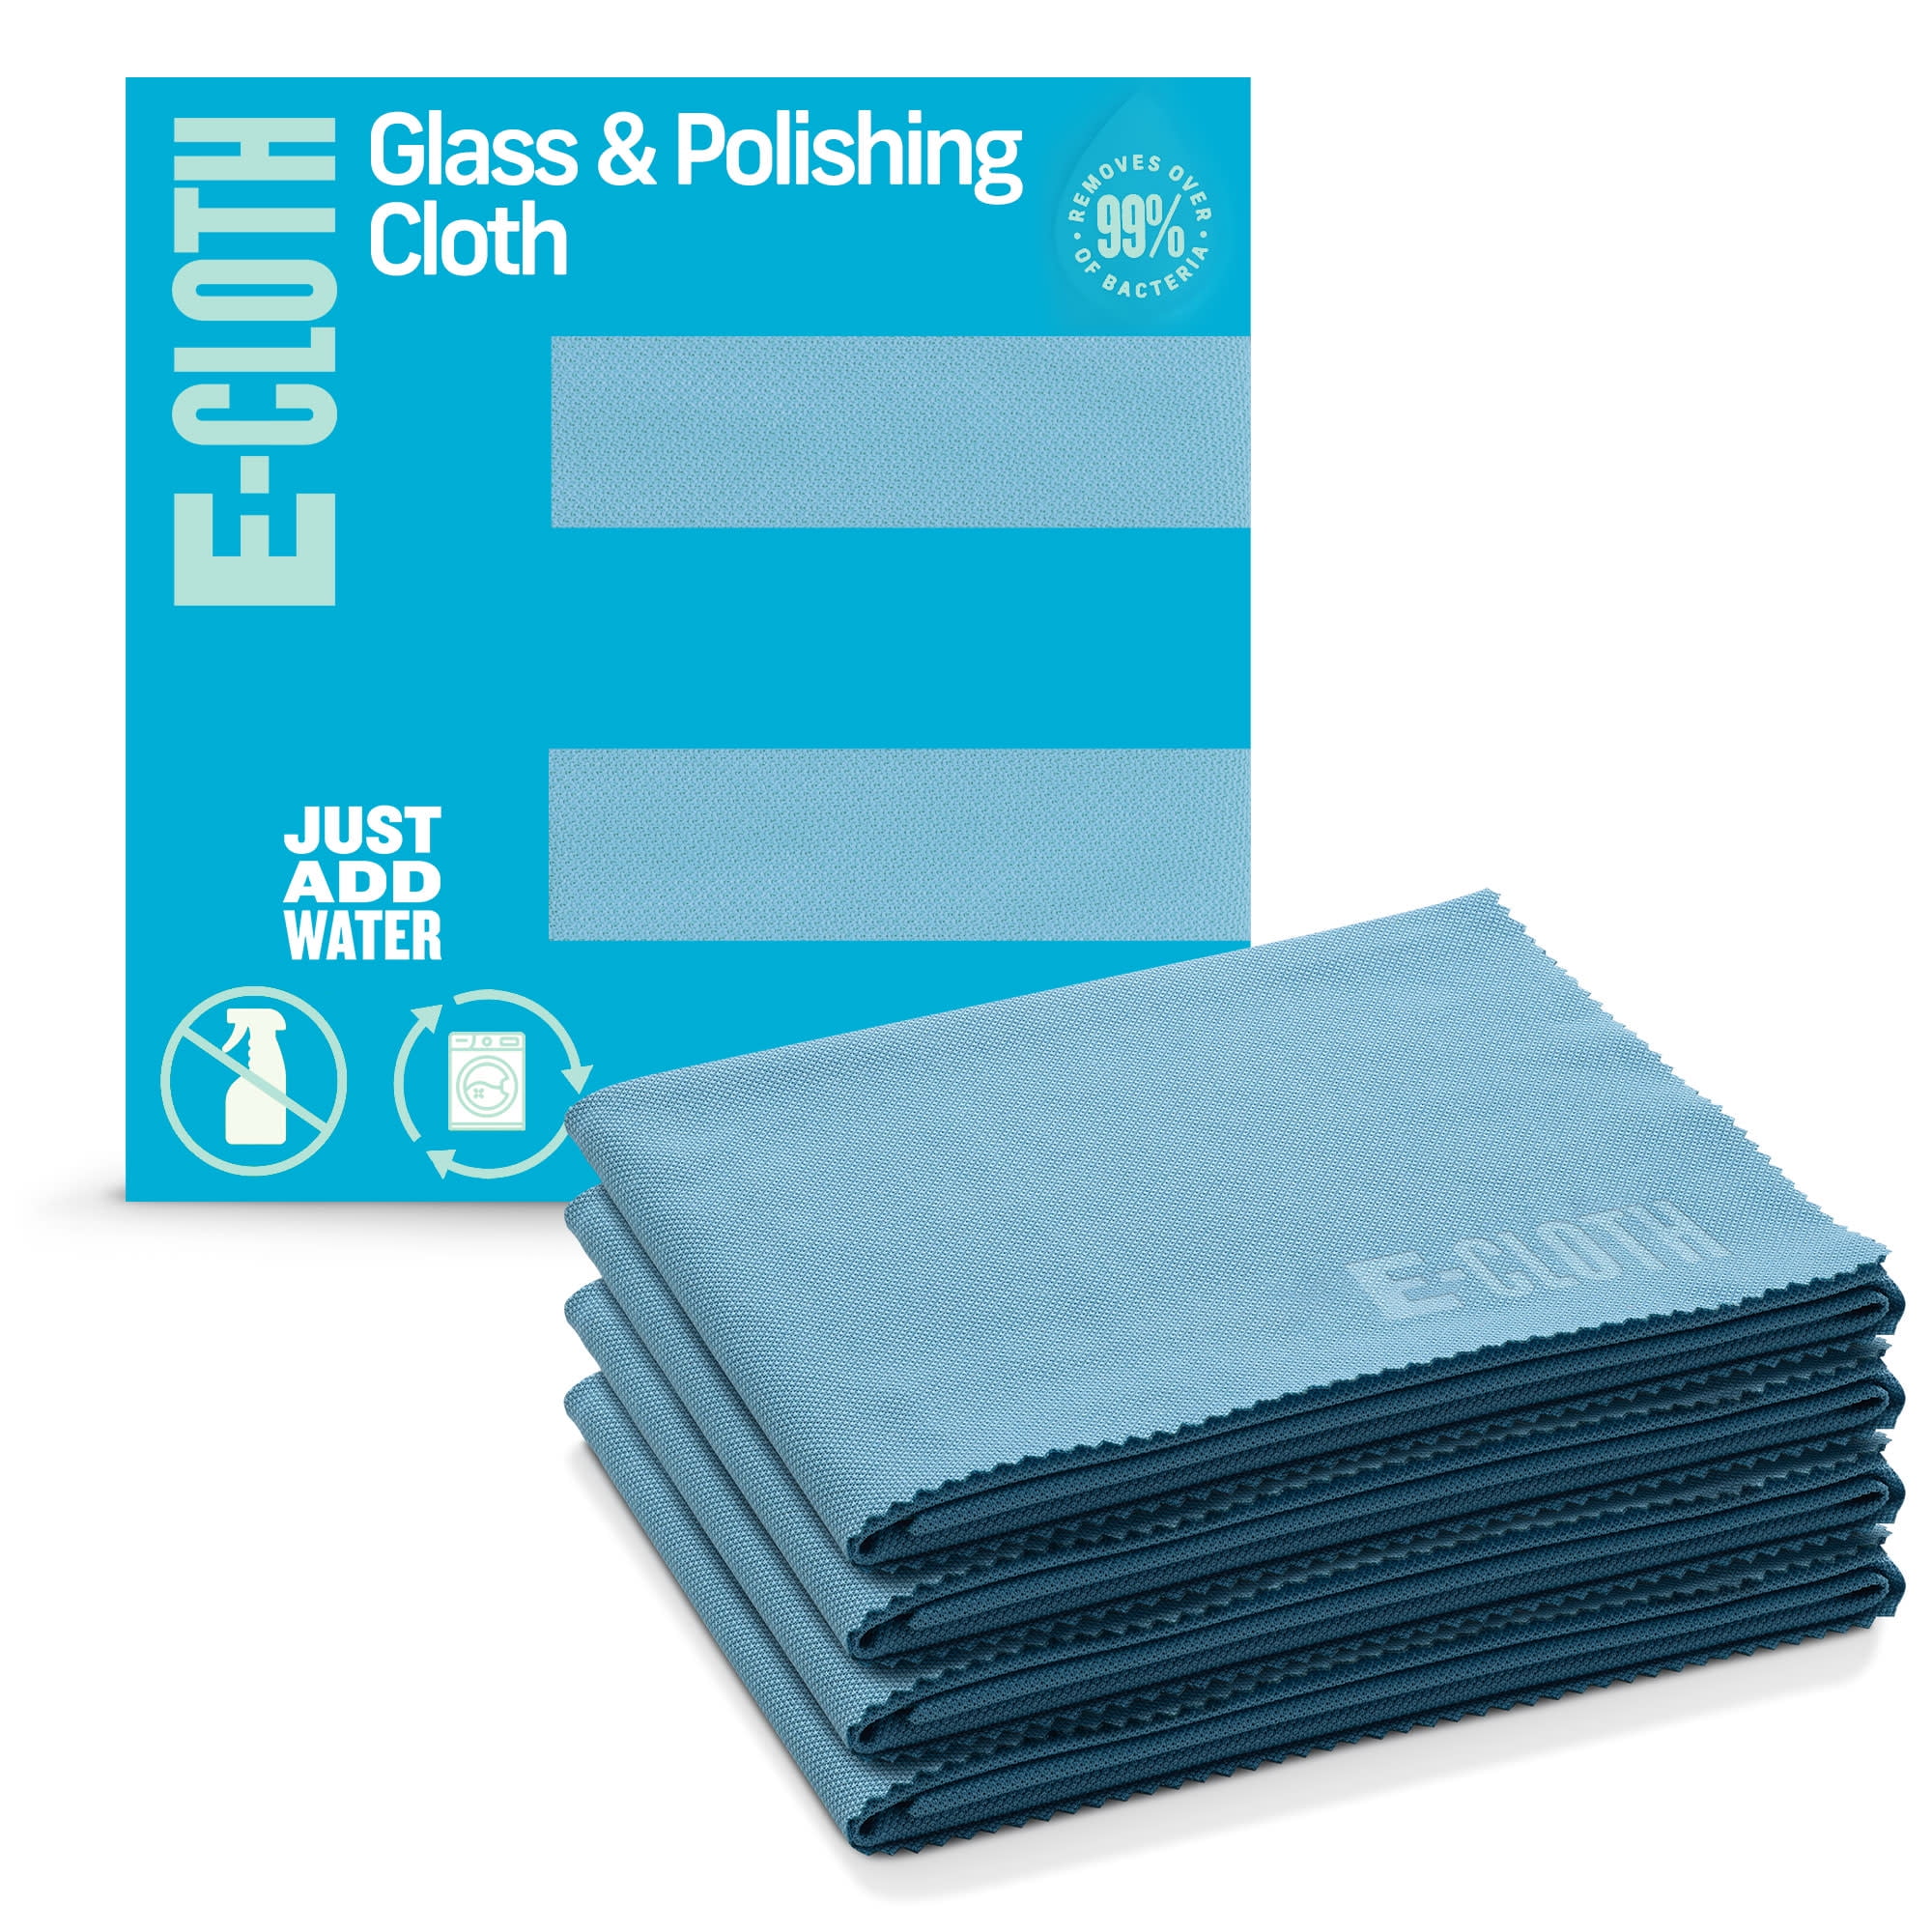 E-Cloth Microfiber Stainless Steel Cleaning and Polishing Cloth 2